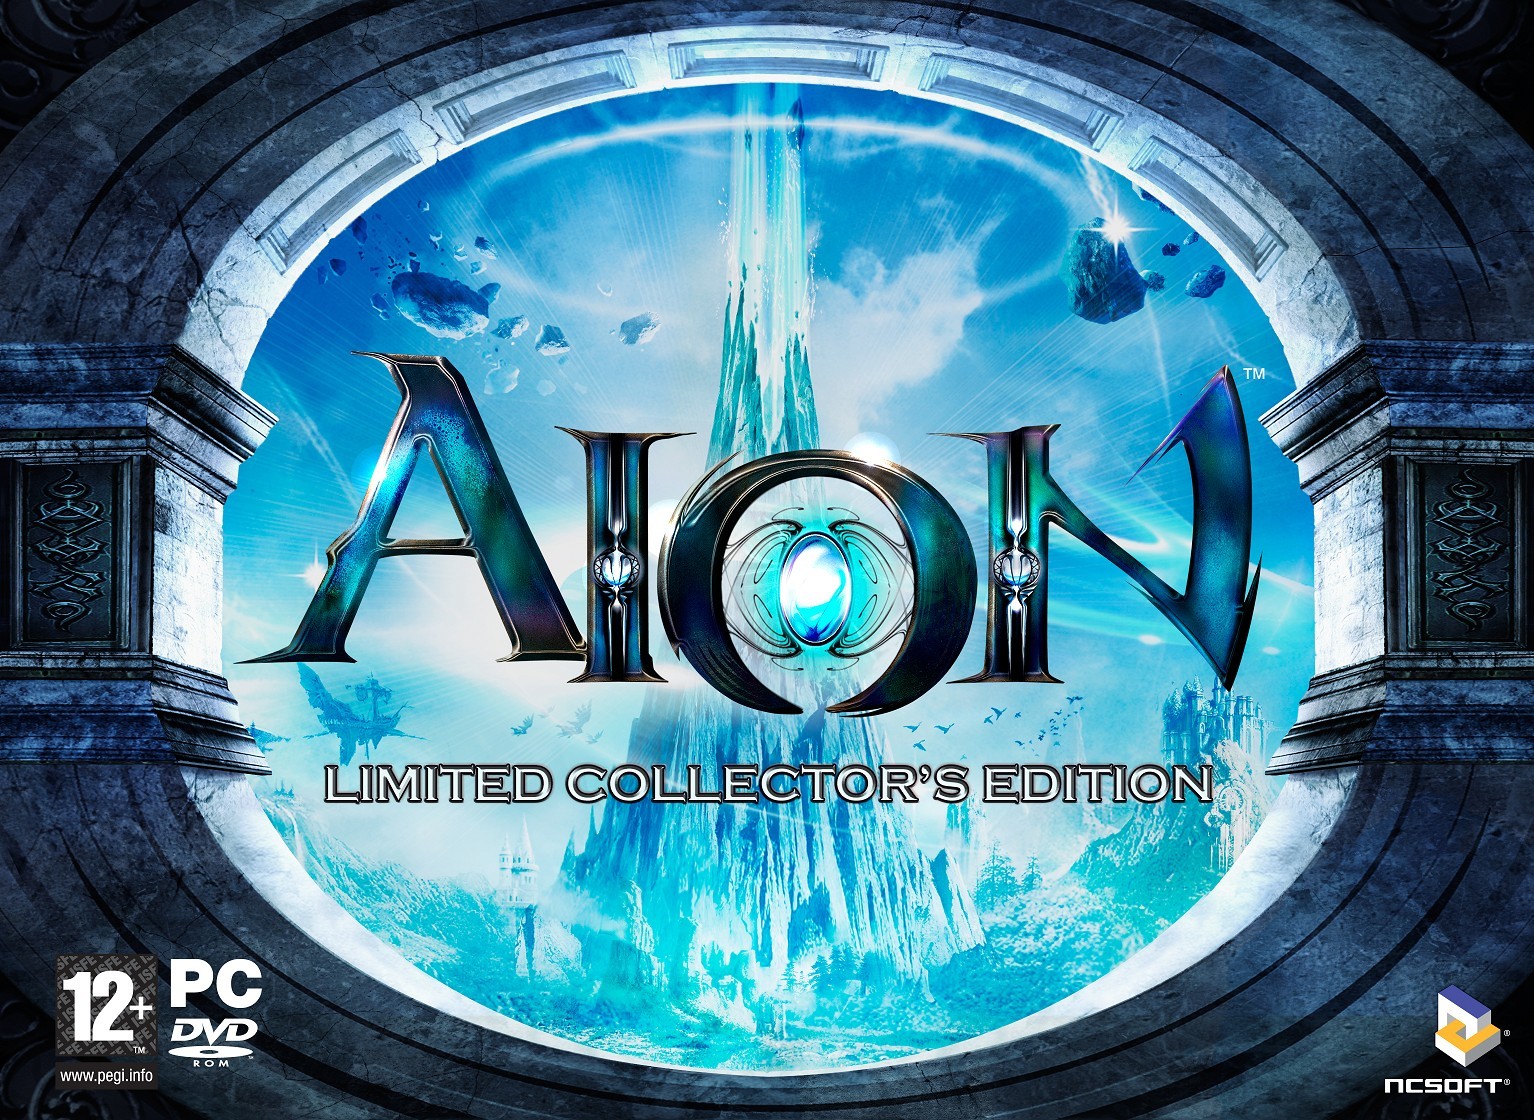 Aion Online PC Gaming Video Games Cyan 1534x1120